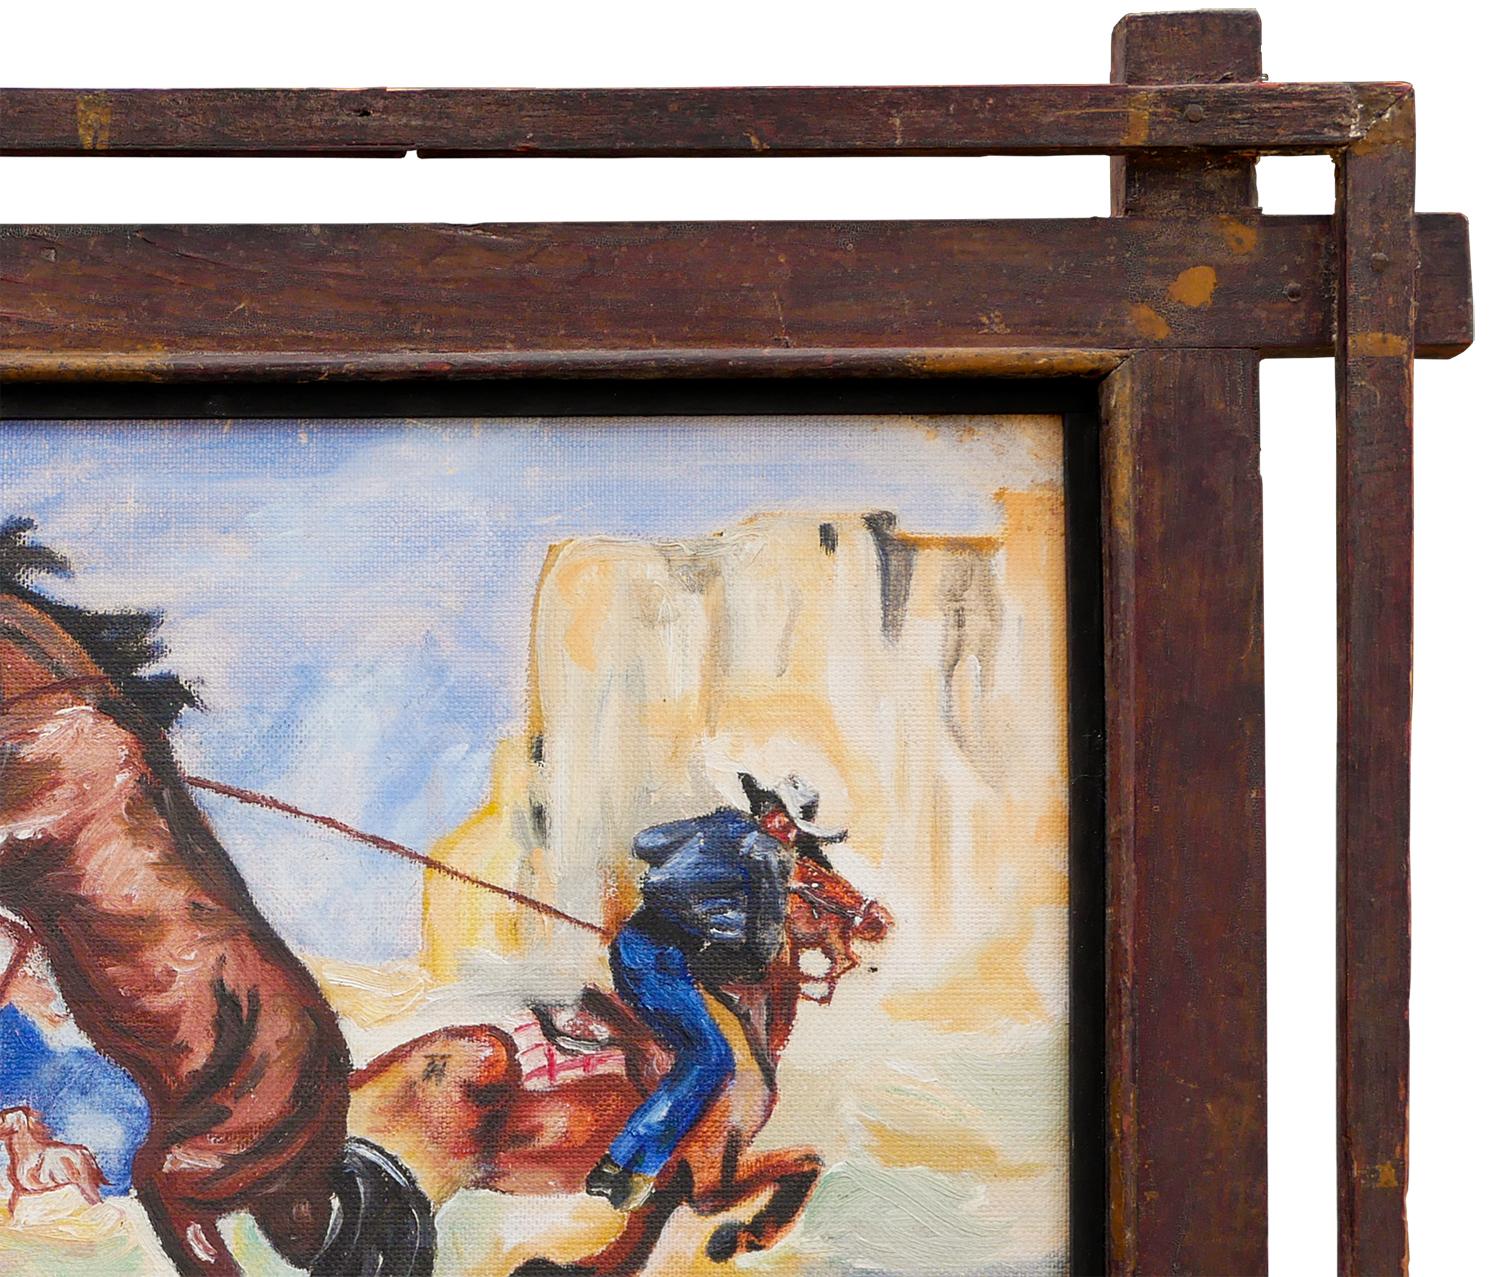 Blue, yellow, brown, and red abstract figurative landscape painting by an outsider artist. The painting depicts a horse chase with two cowboys in the middle of a Western desert. Unsigned. Framed in a wooden double frame. 

Dimensions Without Frame: